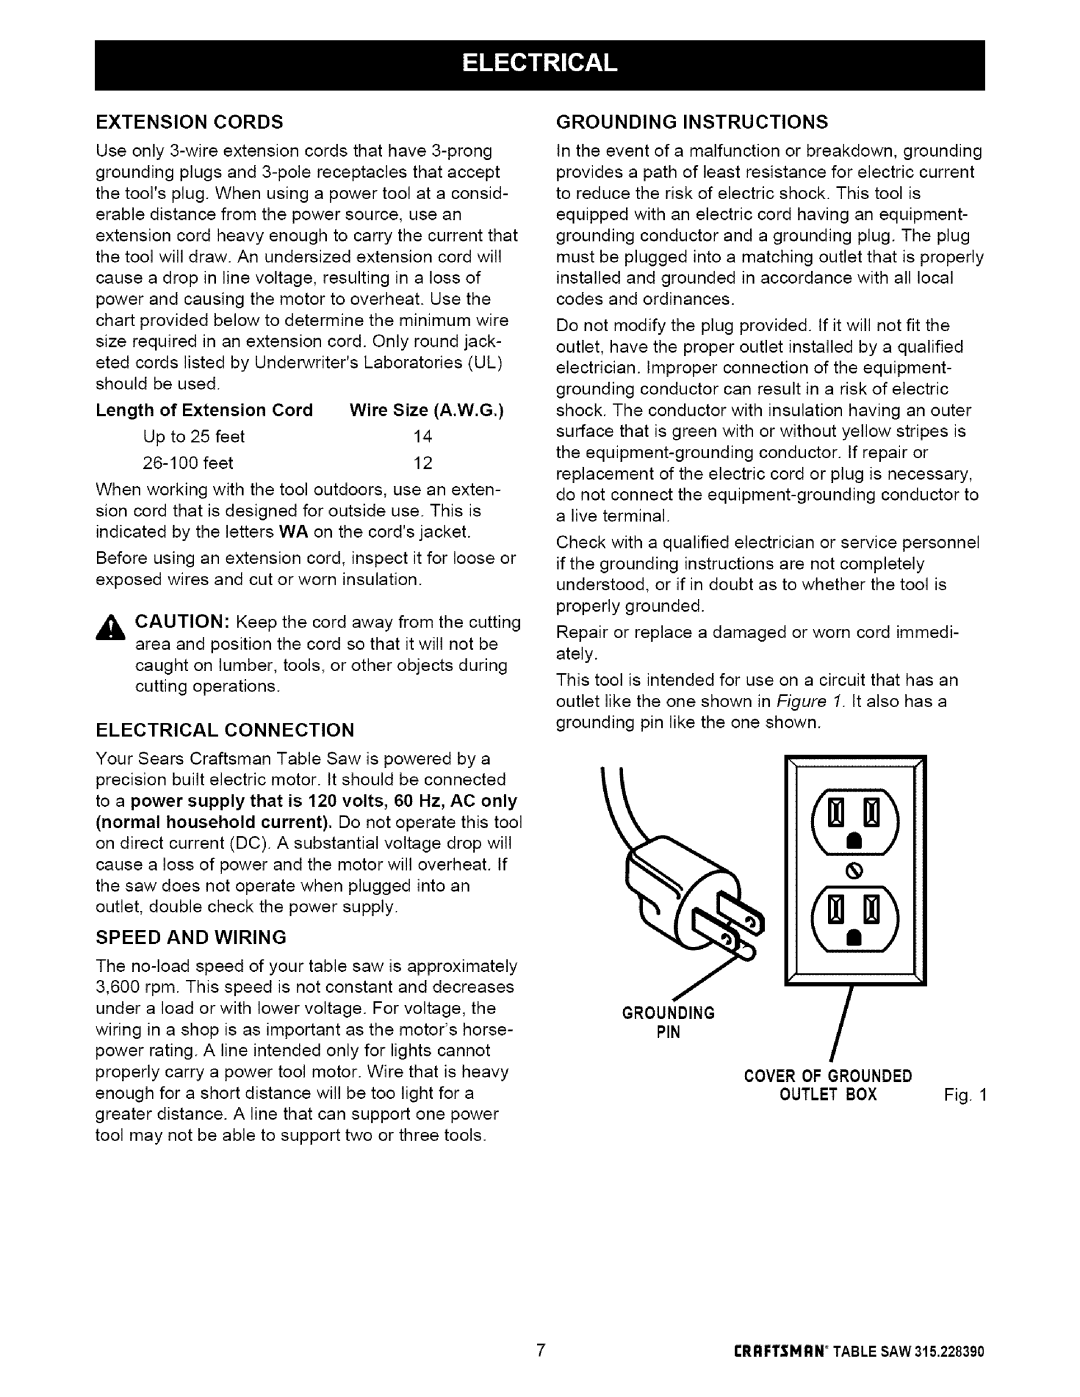 Craftsman 315.22839 owner manual Grounding Instructions, Grounding Pin Cover Of Grounded 